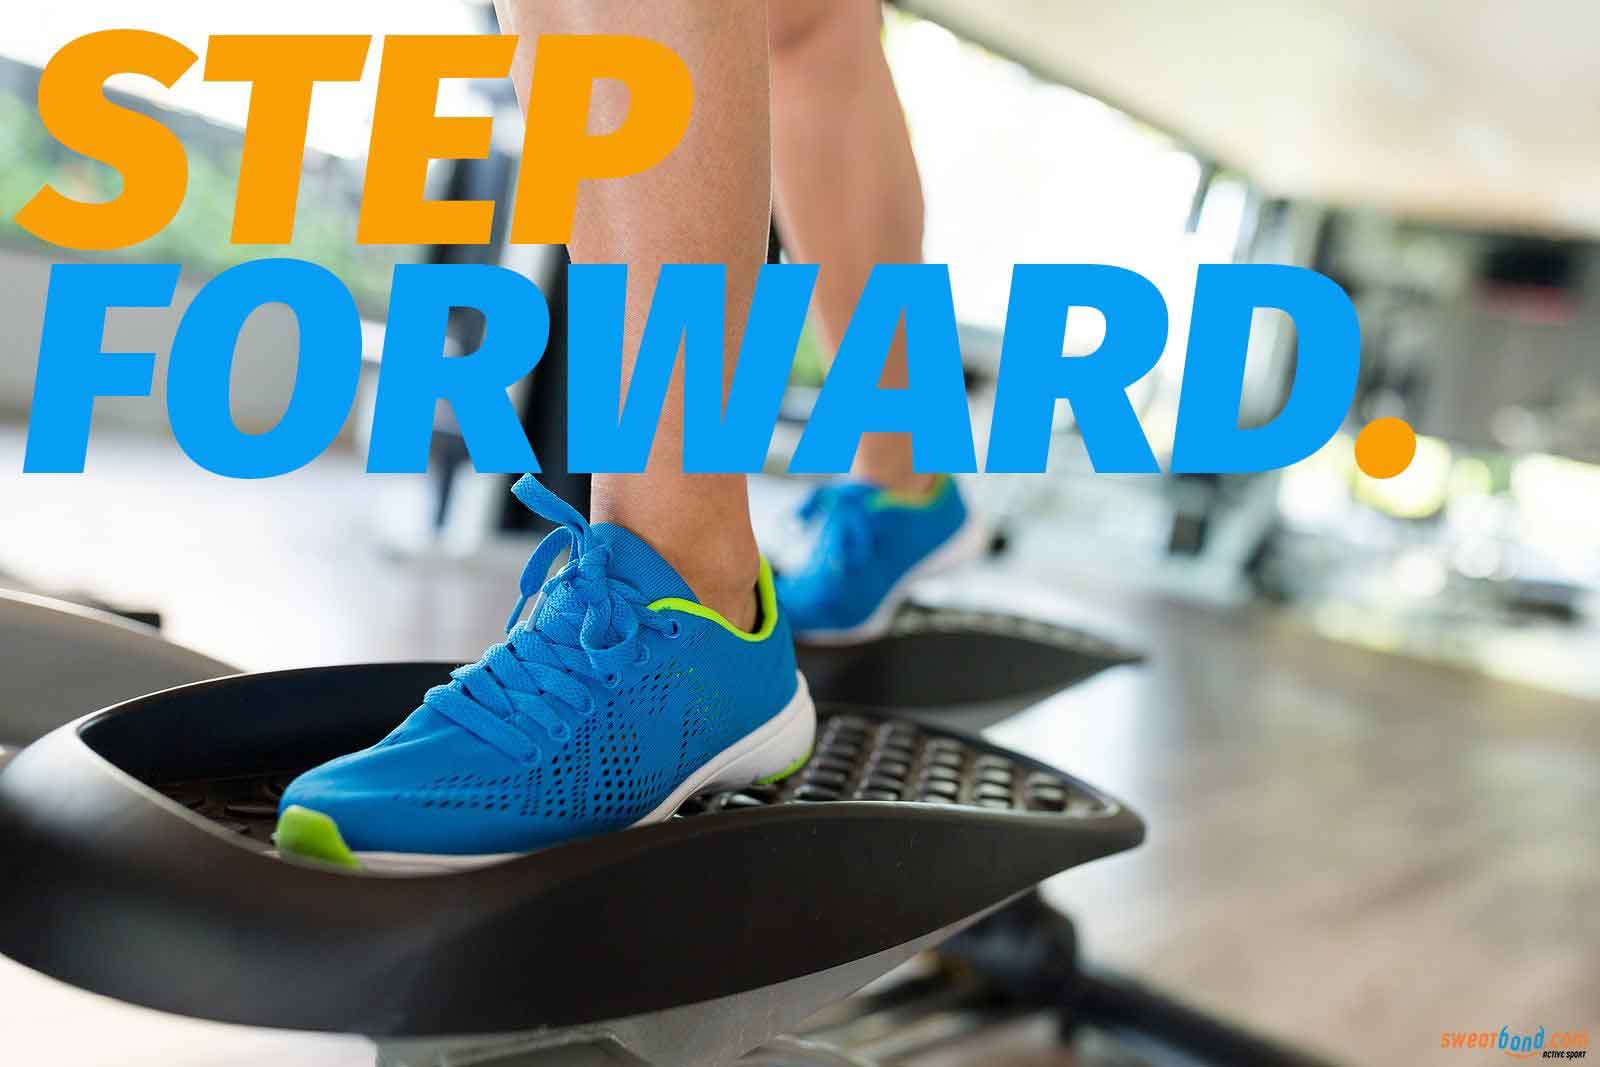 Try forwards and backwards elliptical motion on your cross trainer for better results